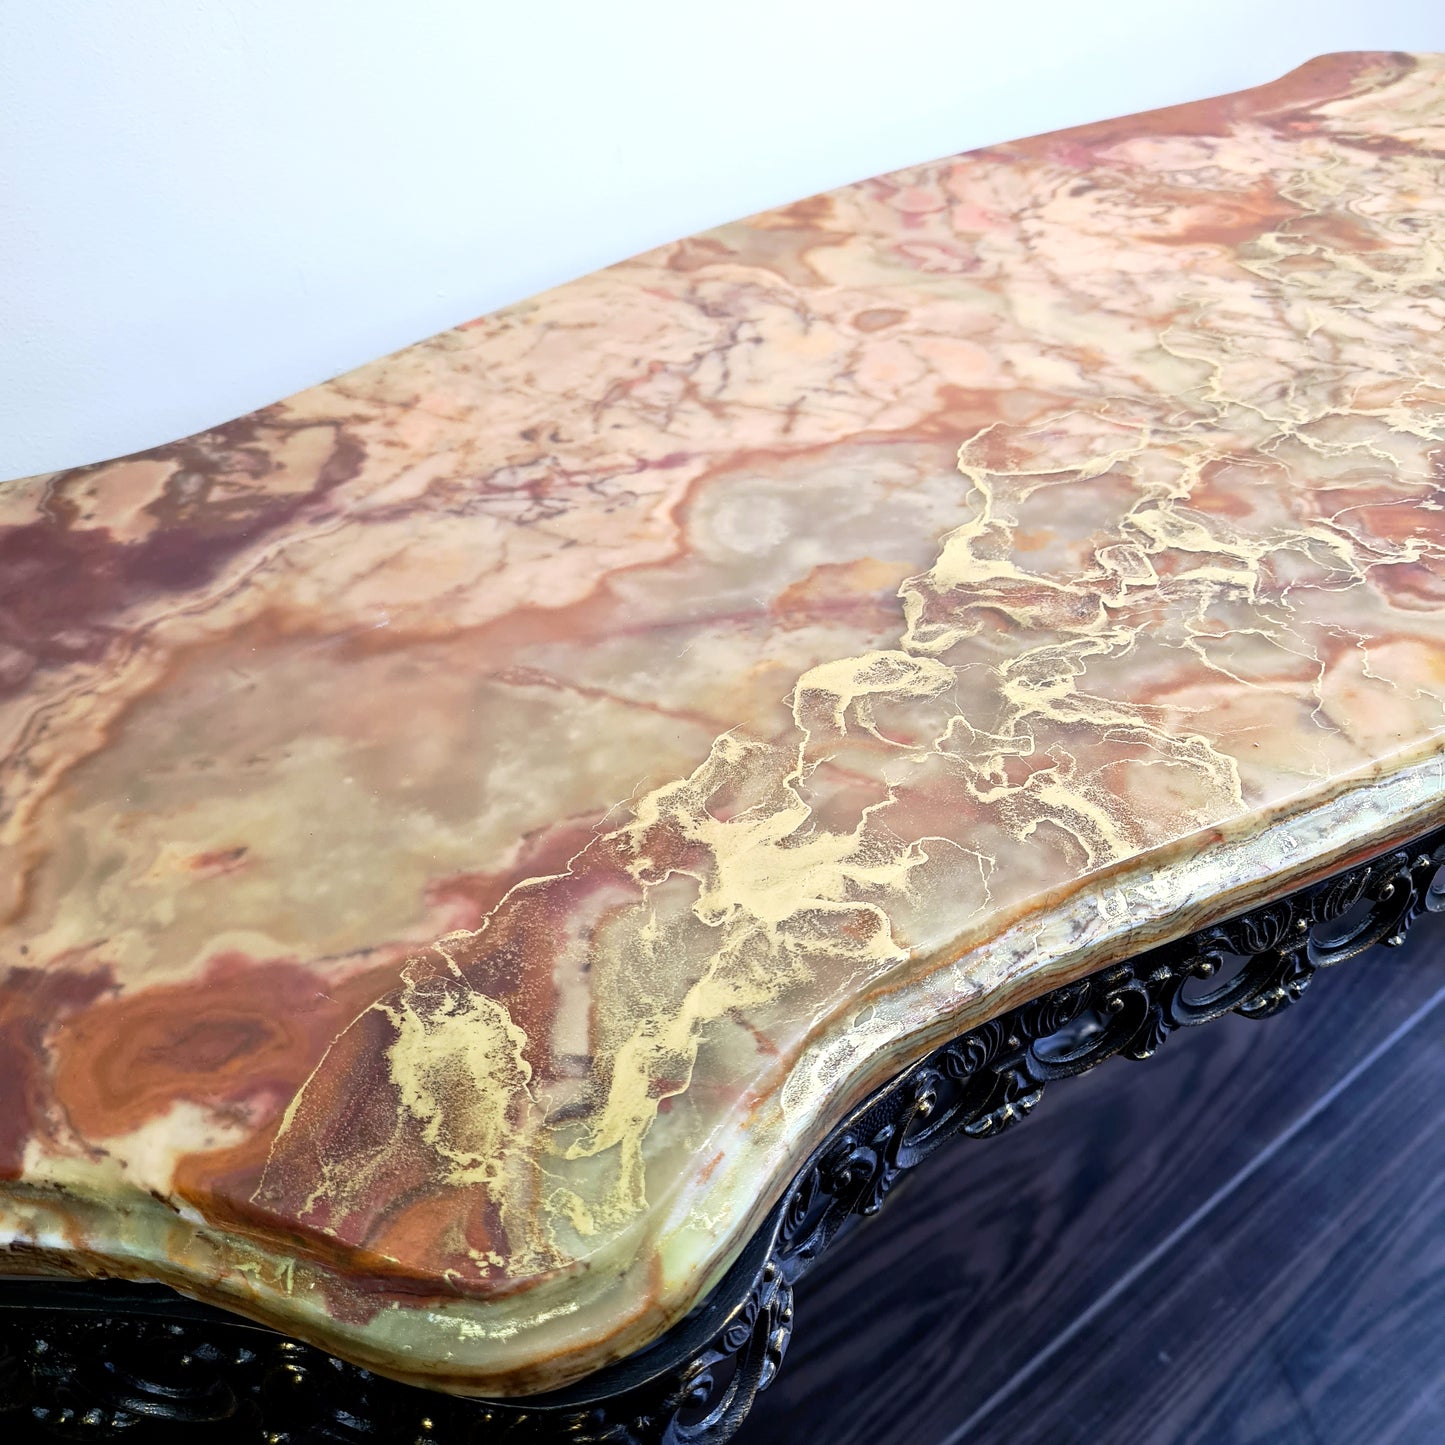 Upcycled Vintage Onyx Coffee Table